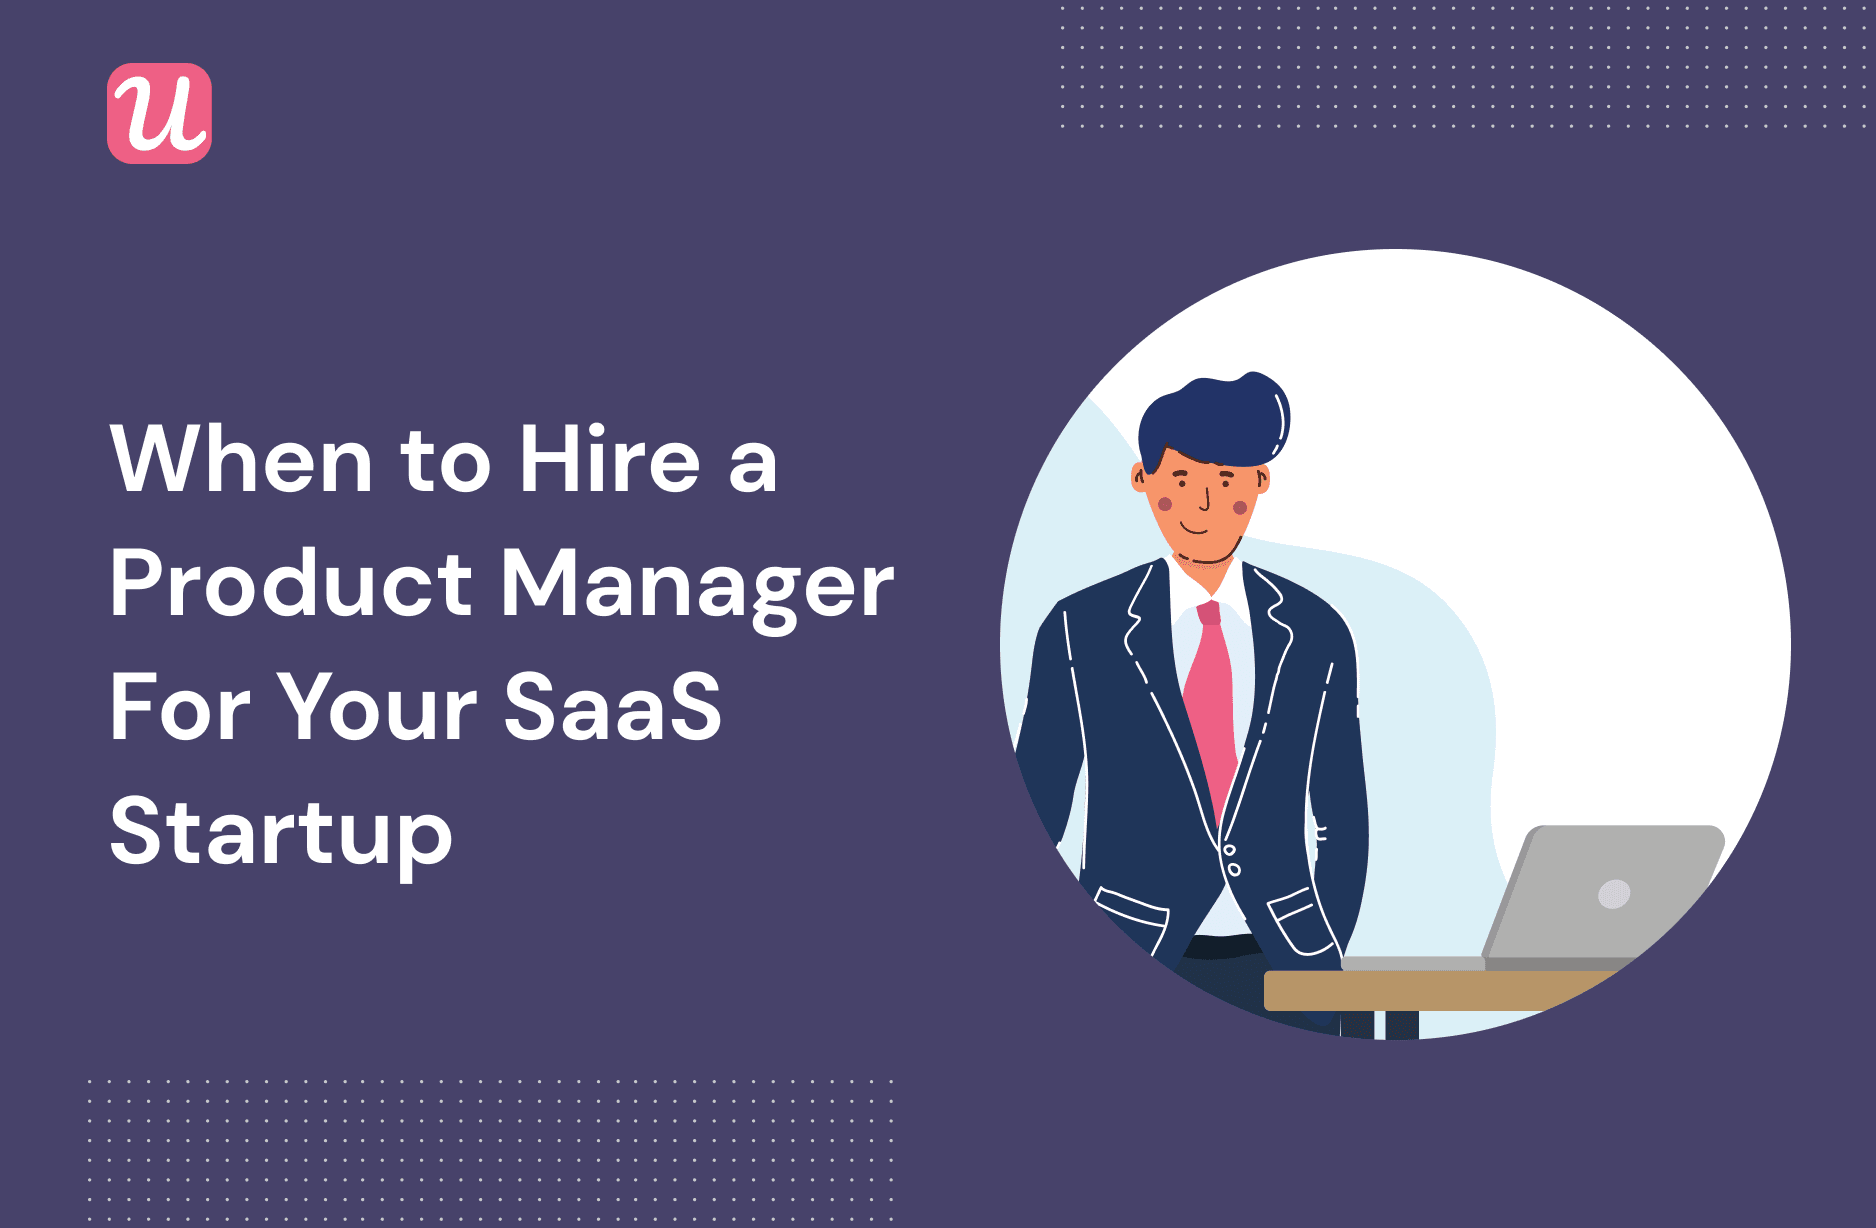 When to Hire a Product Manager for Your SaaS Startup